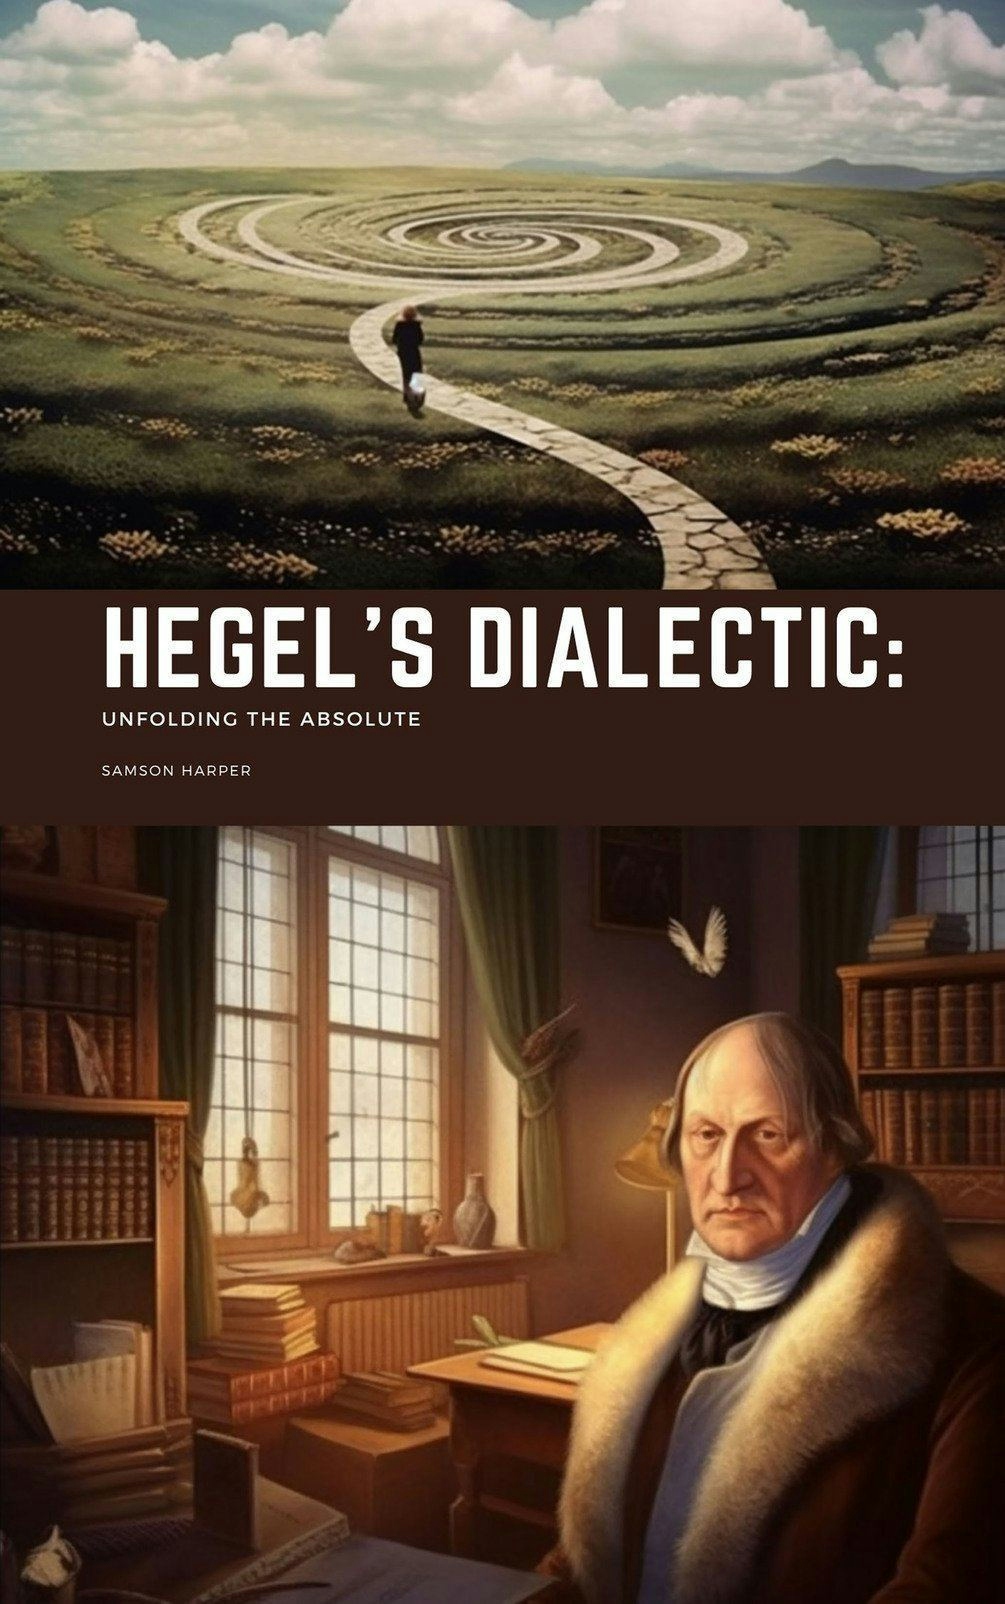 Hegel's Dialectic: Unfolding the Absolute